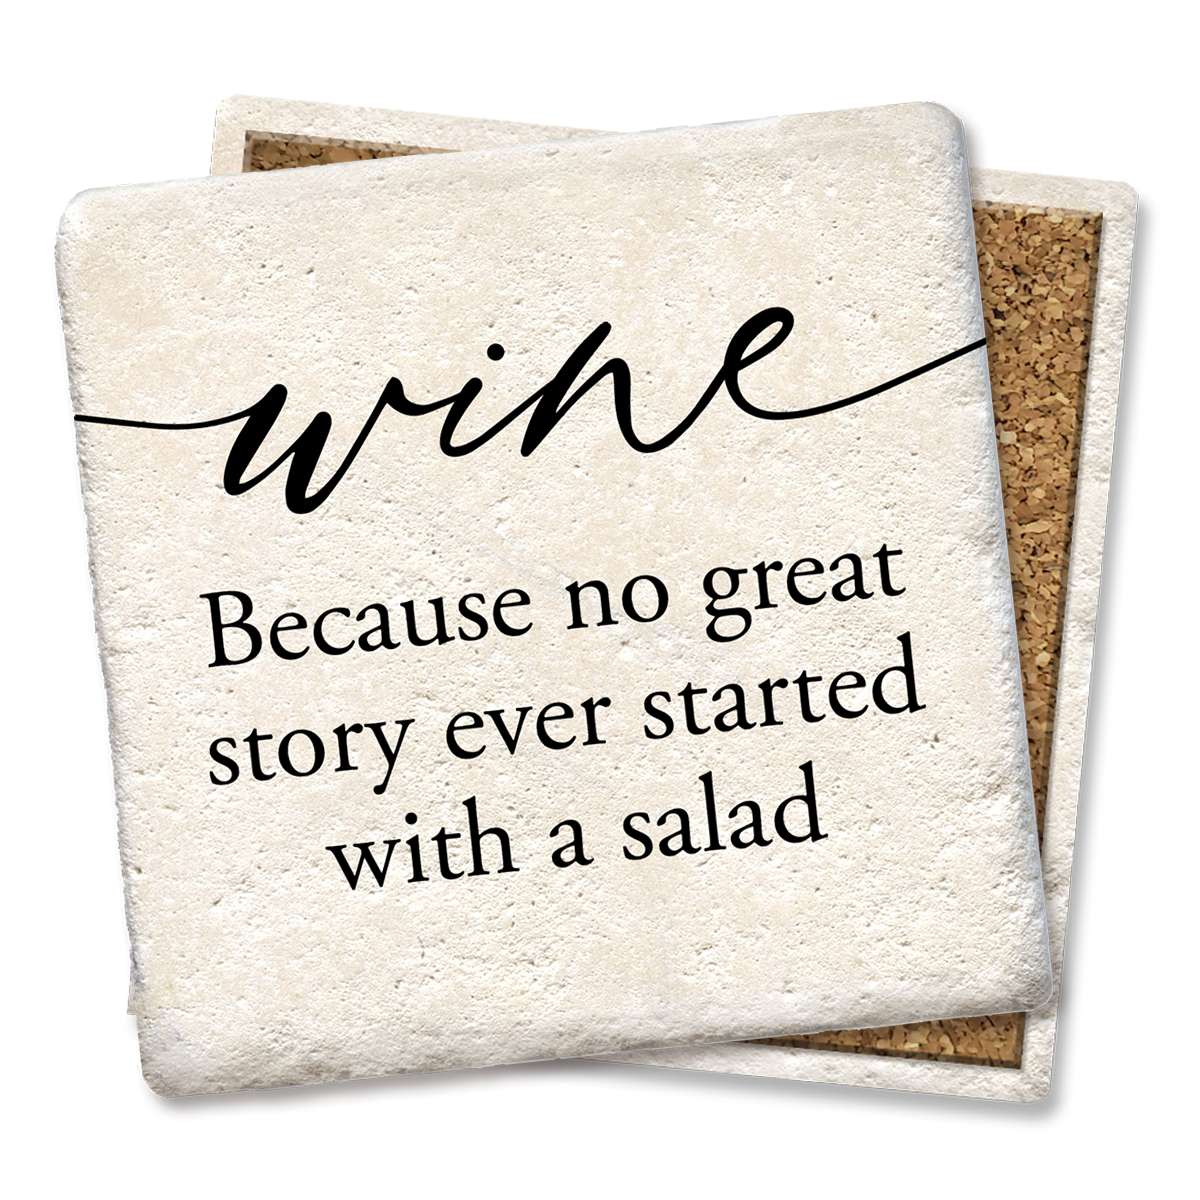 Coaster - Wine Because No Great Story Ever Started With Eating a Salad